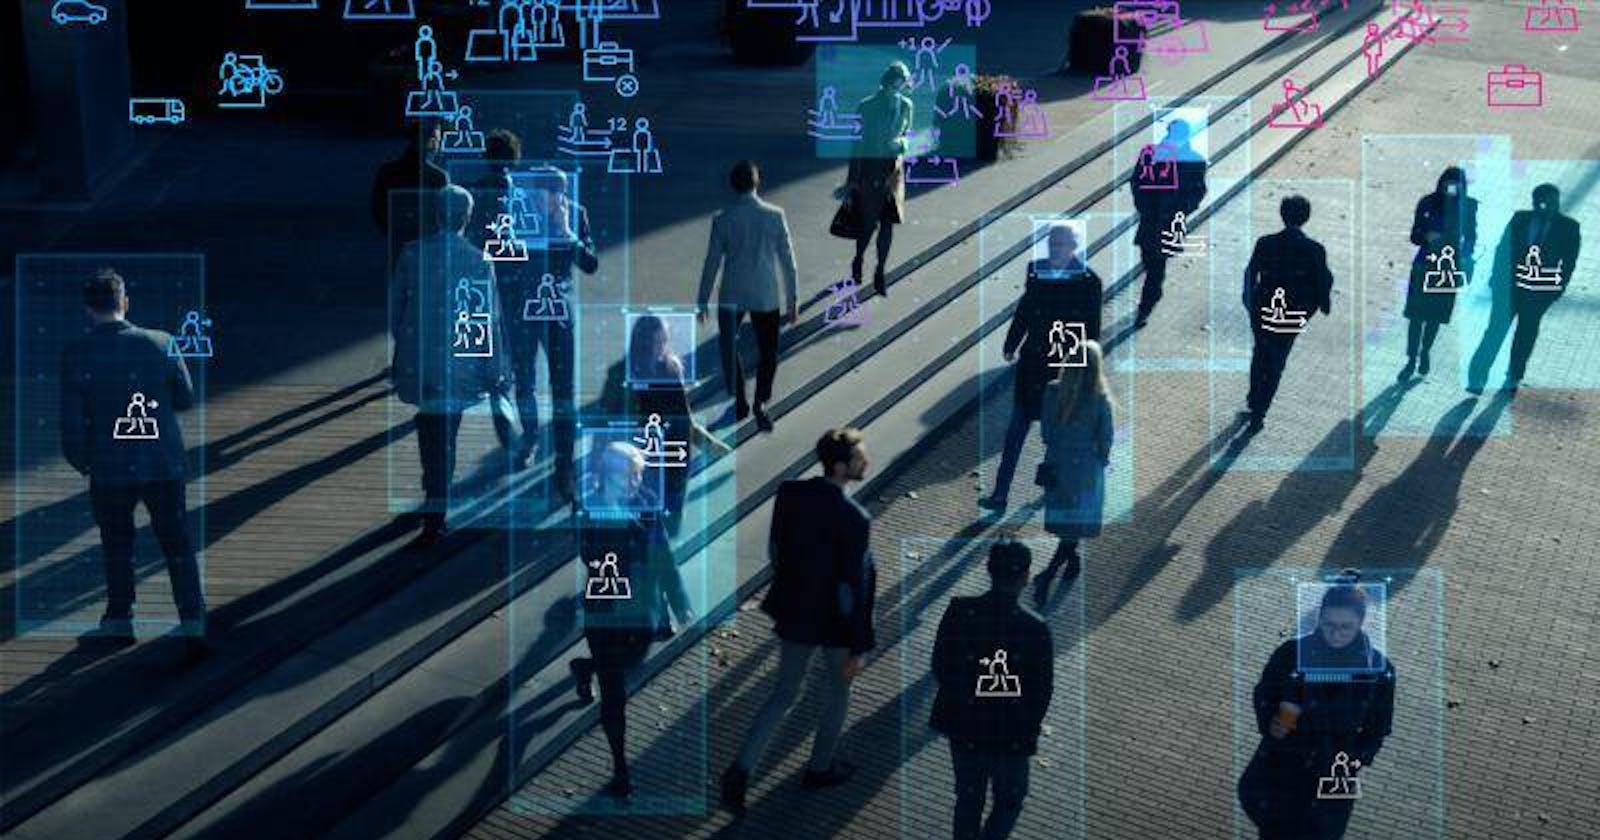 AI Video Analytics: A Powerful Tool for Security, Business, and More